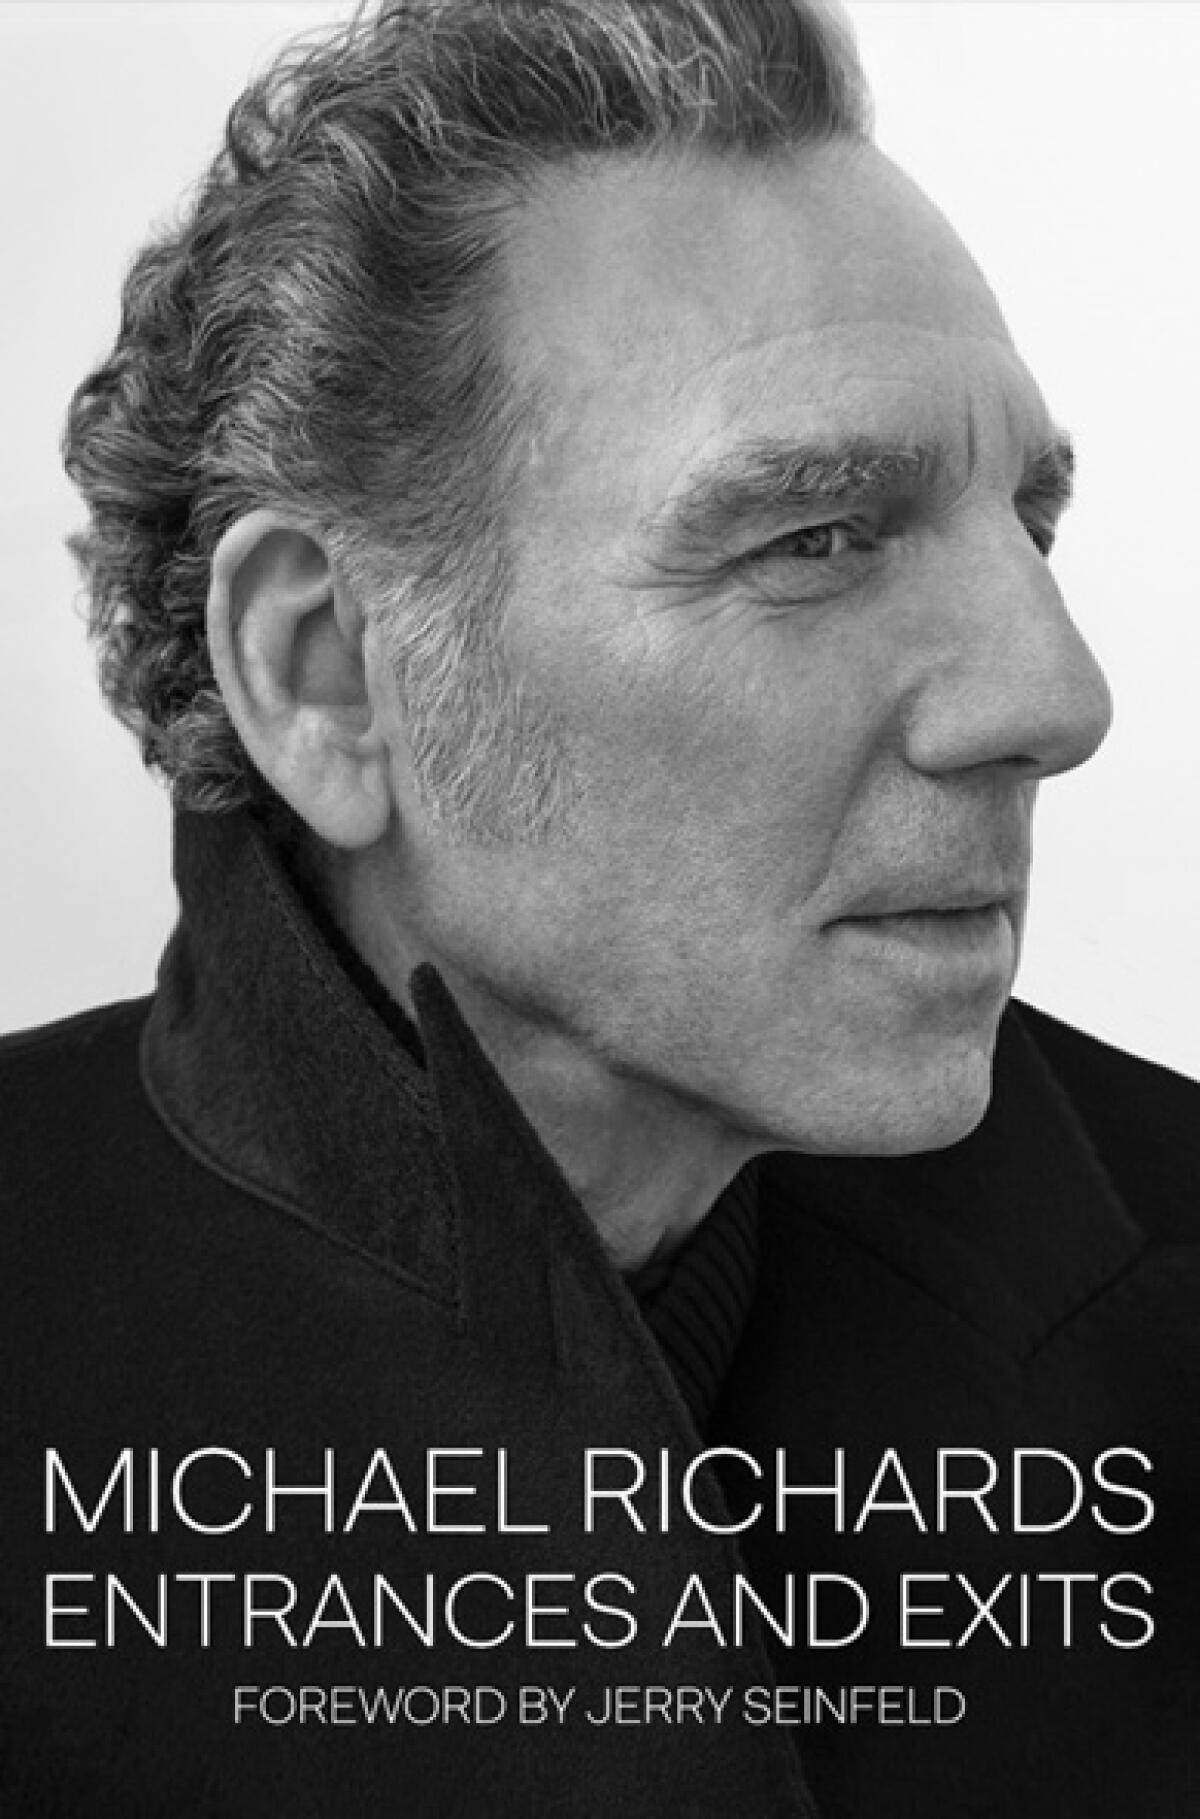 "Entrances and Exits" by Michael Richards